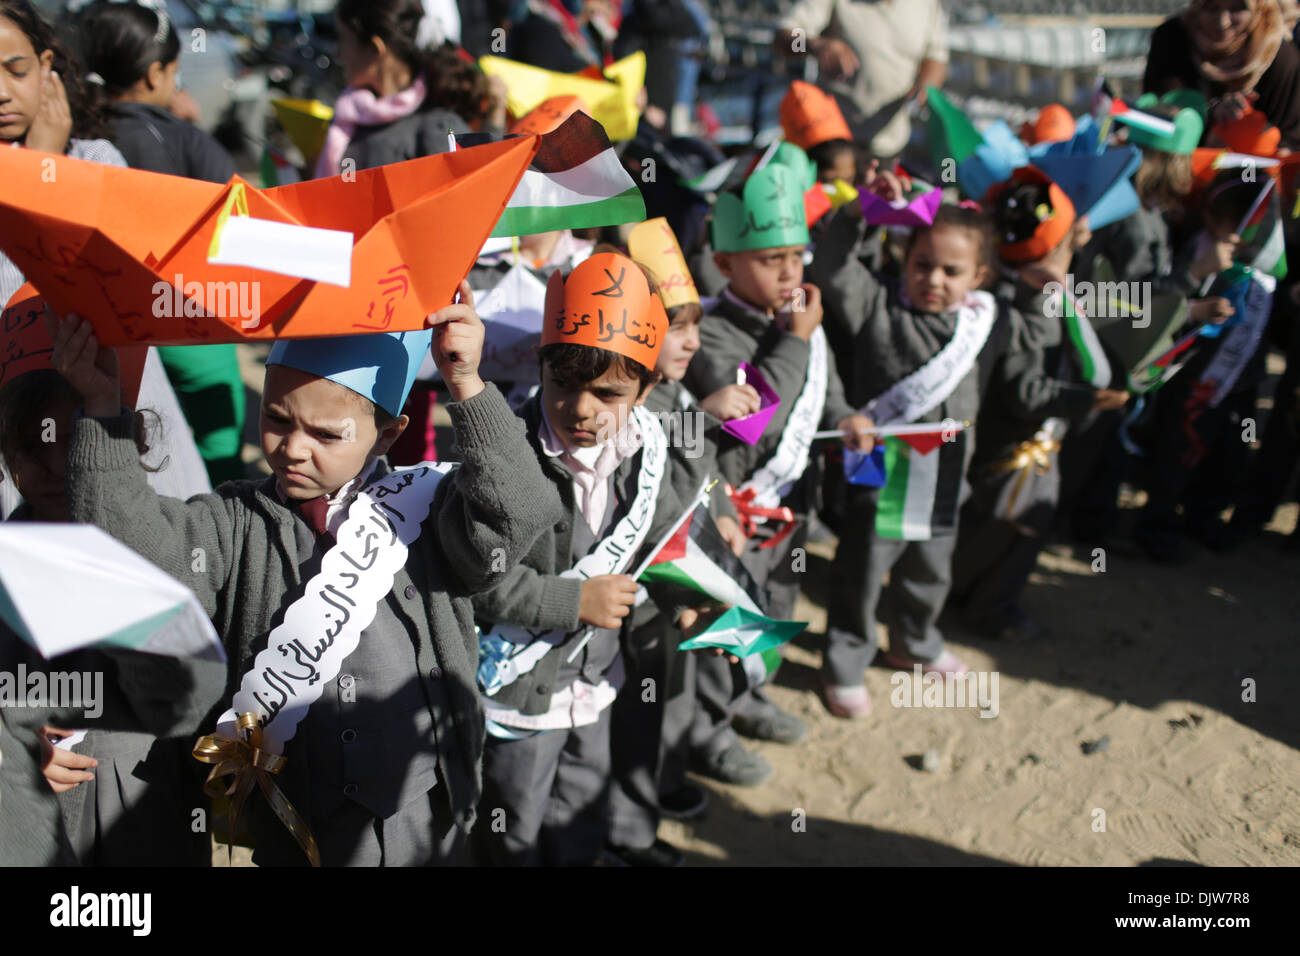 (131130) -- GAZA, Nov. 30, 2013 (Xinhua)  -- Palestinian children hold banners and Palestinian national flags during a protest against Israel's maritime blockade on the Gaza Strip at a port in Gaza City, Nov. 30, 2013. (Xinhua/Wissam Nassar) Stock Photo